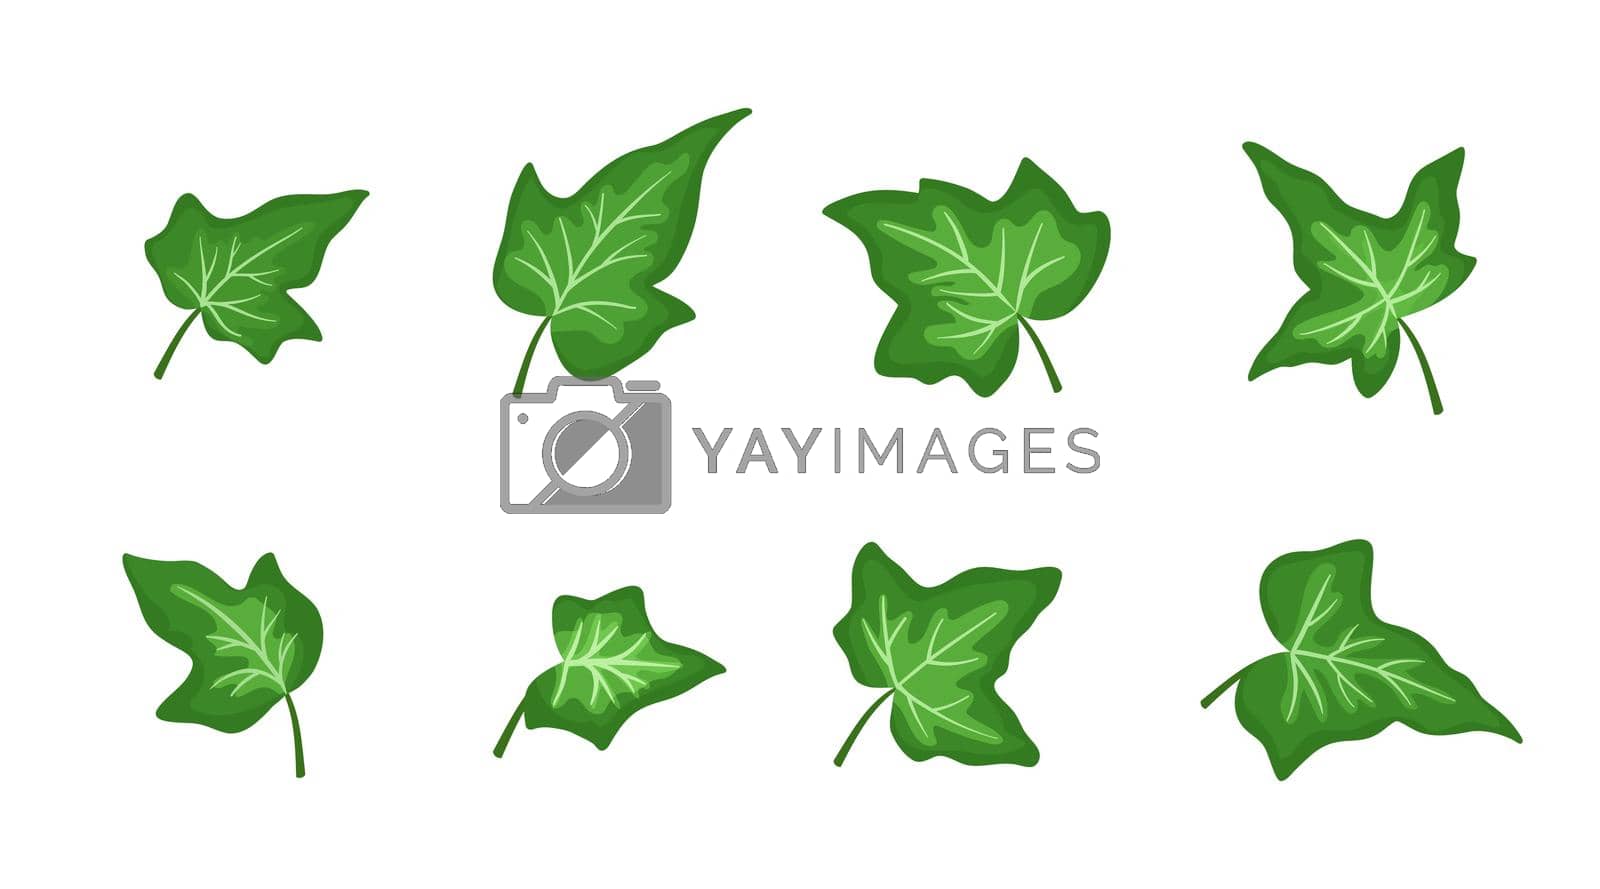 Royalty free image of Set of green ivy leaves isolated on white background. Vector flat cartoon illustrations by ElenaPlatova